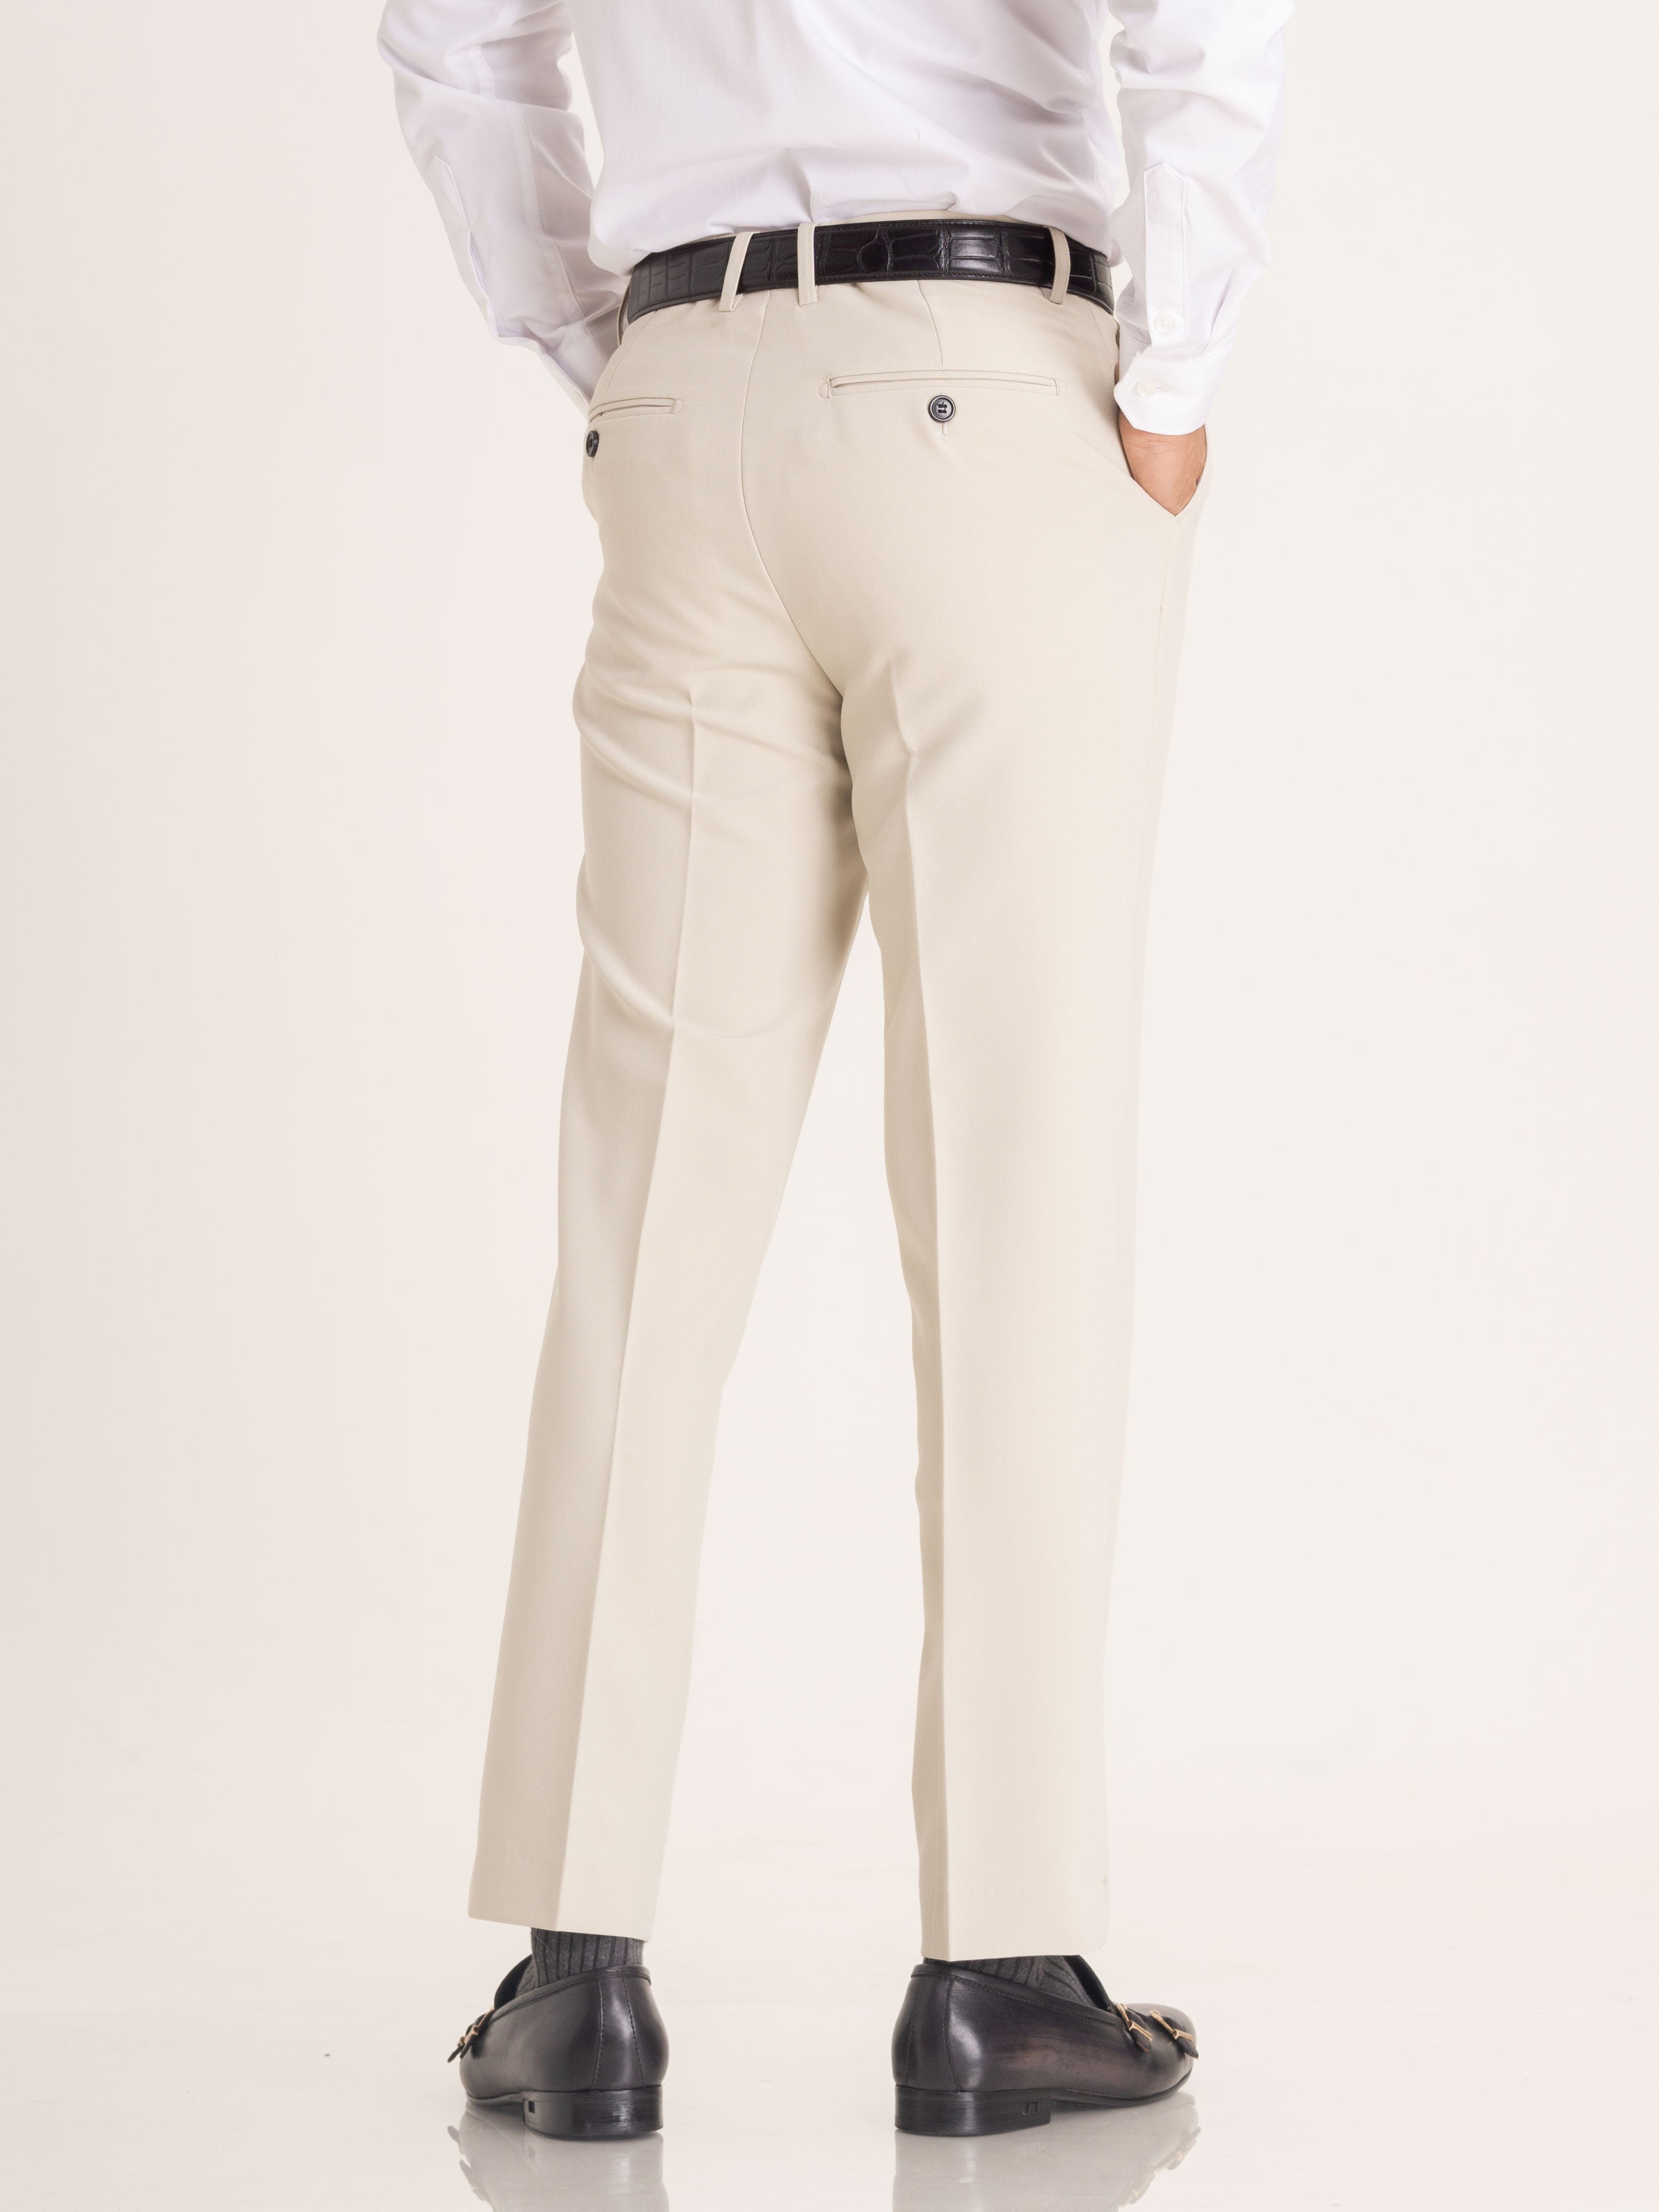 Trousers With Belt Loop - Sand White Plain (Stretchable) - Zeve Shoes